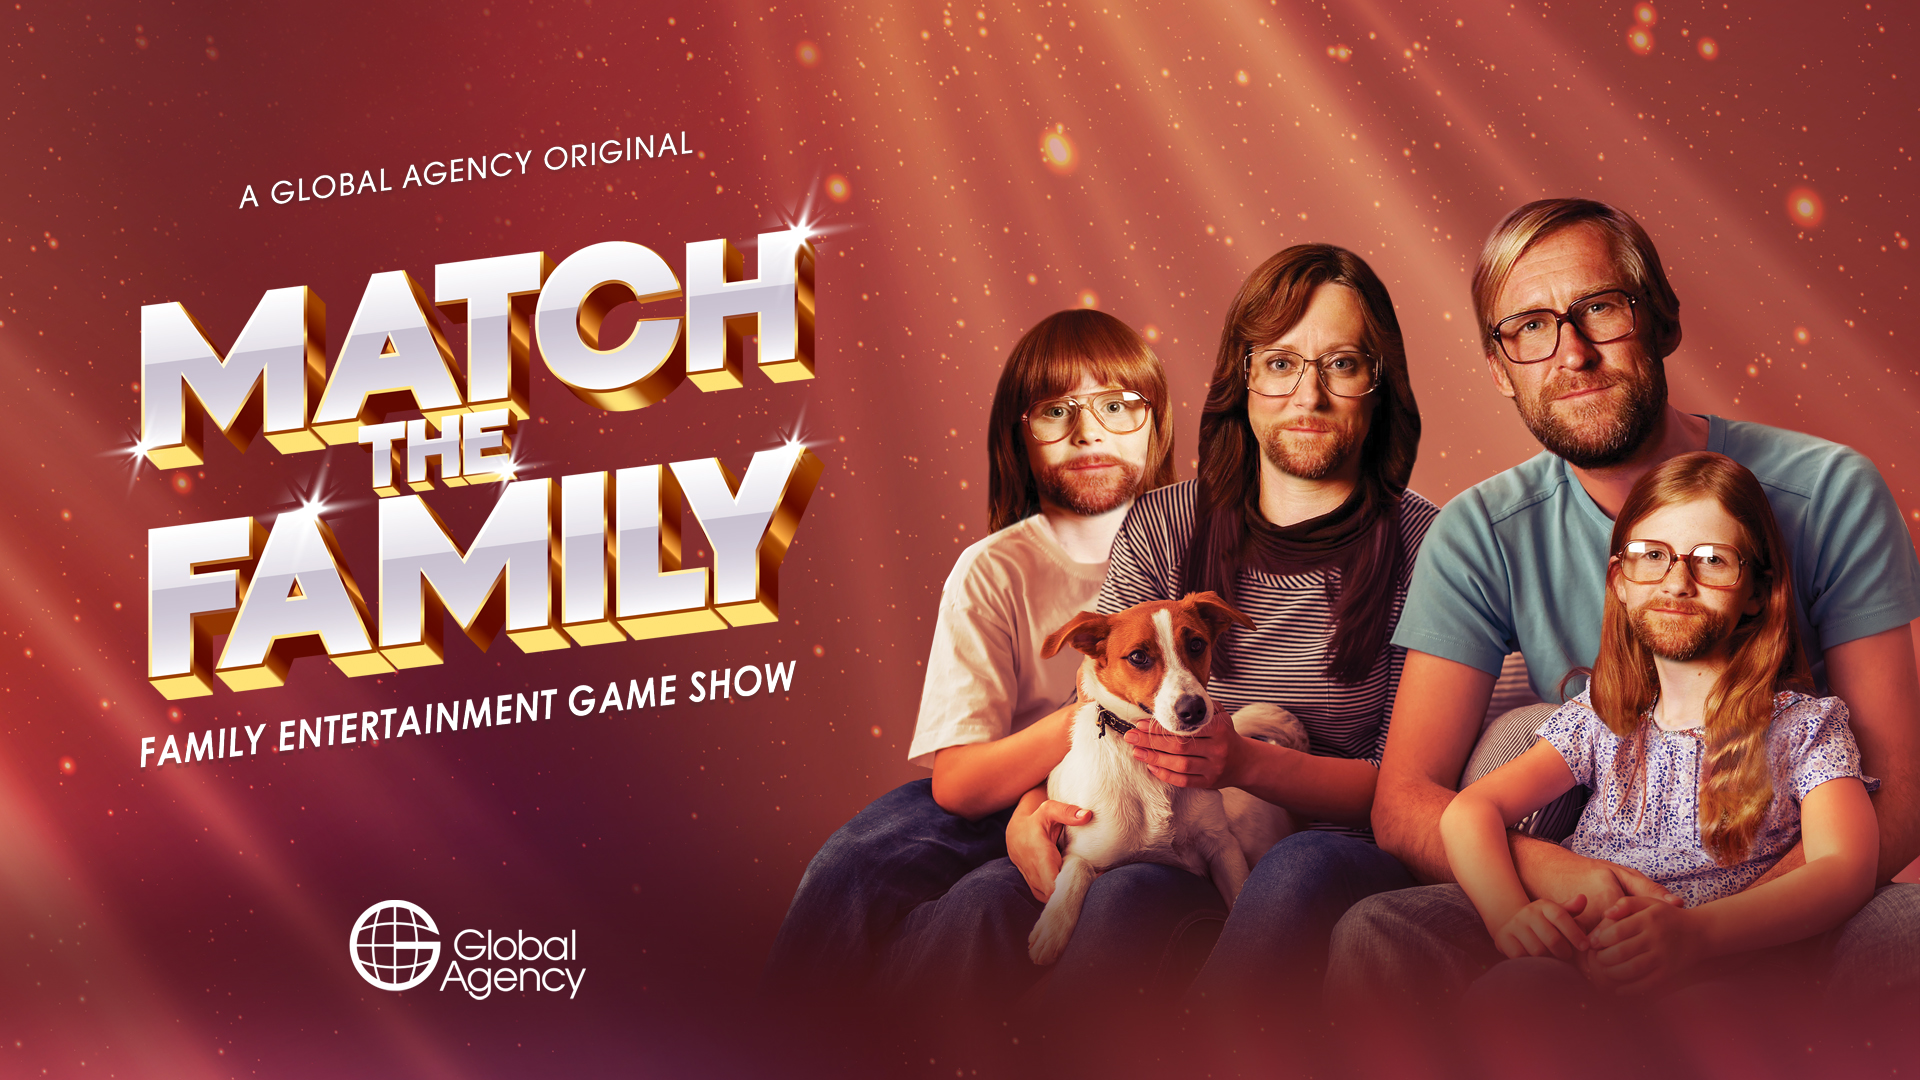 Global Agency Delivers Family-Friendly Fun with Match the Family